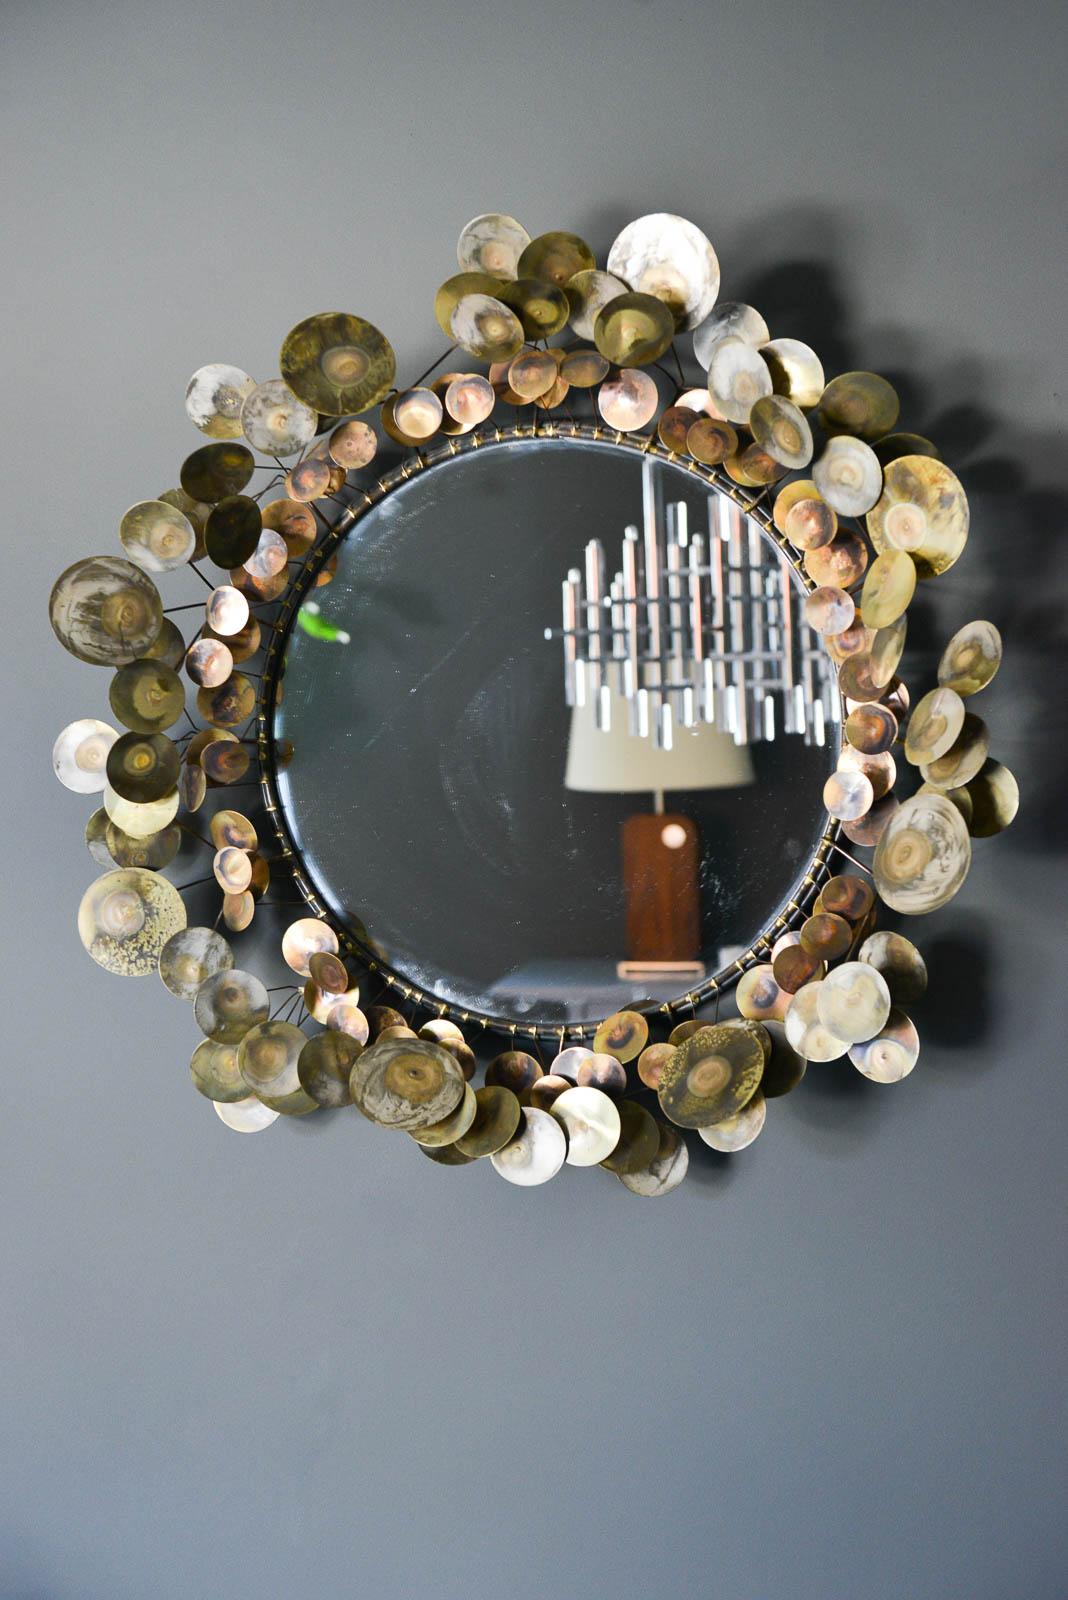 Raindrops mirror by C. Jere, 1969. Original piece, not a reproduction. Beautiful condition with no cracks or chips to the mirror or missing discs. Wonderful brass patina. Ready to hang, weighs approximate 30 lbs.

Measures: 32